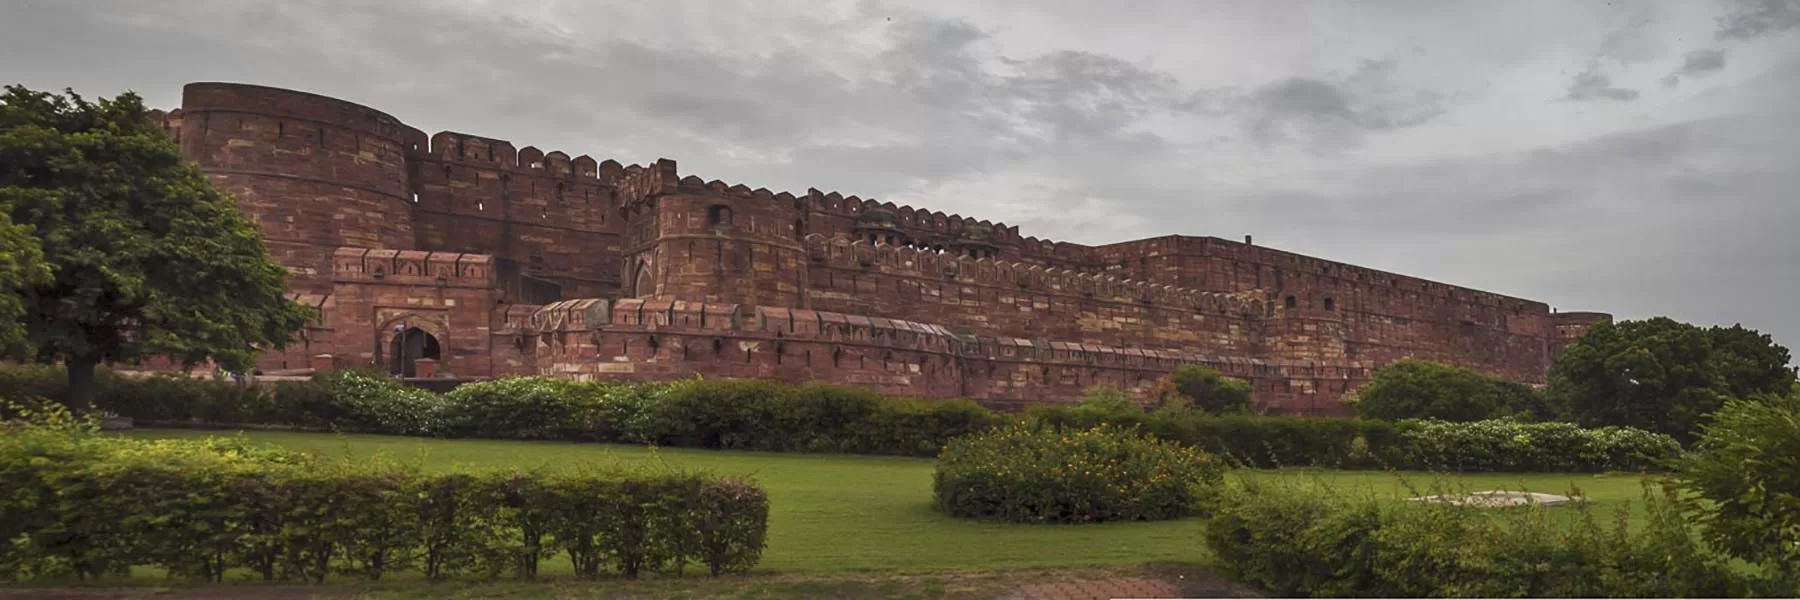 Visit the forts and palaces of India